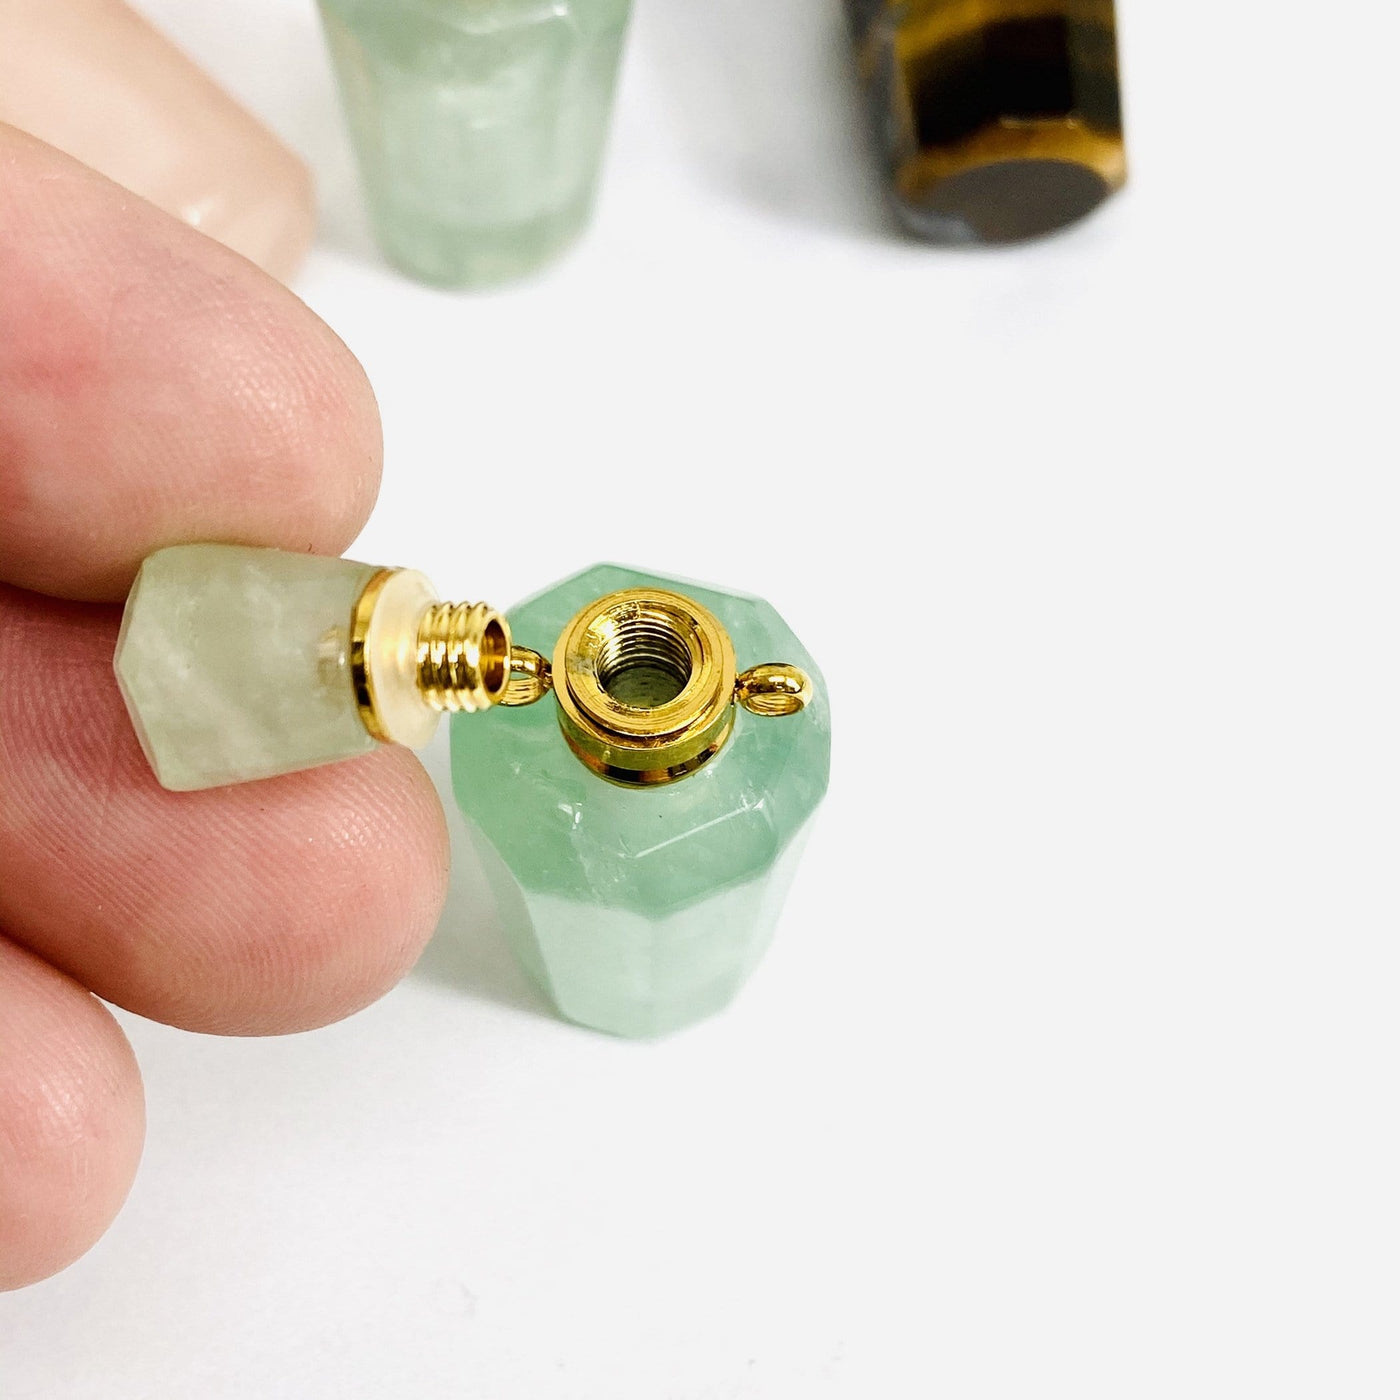 close up of bottle pendant with the top off